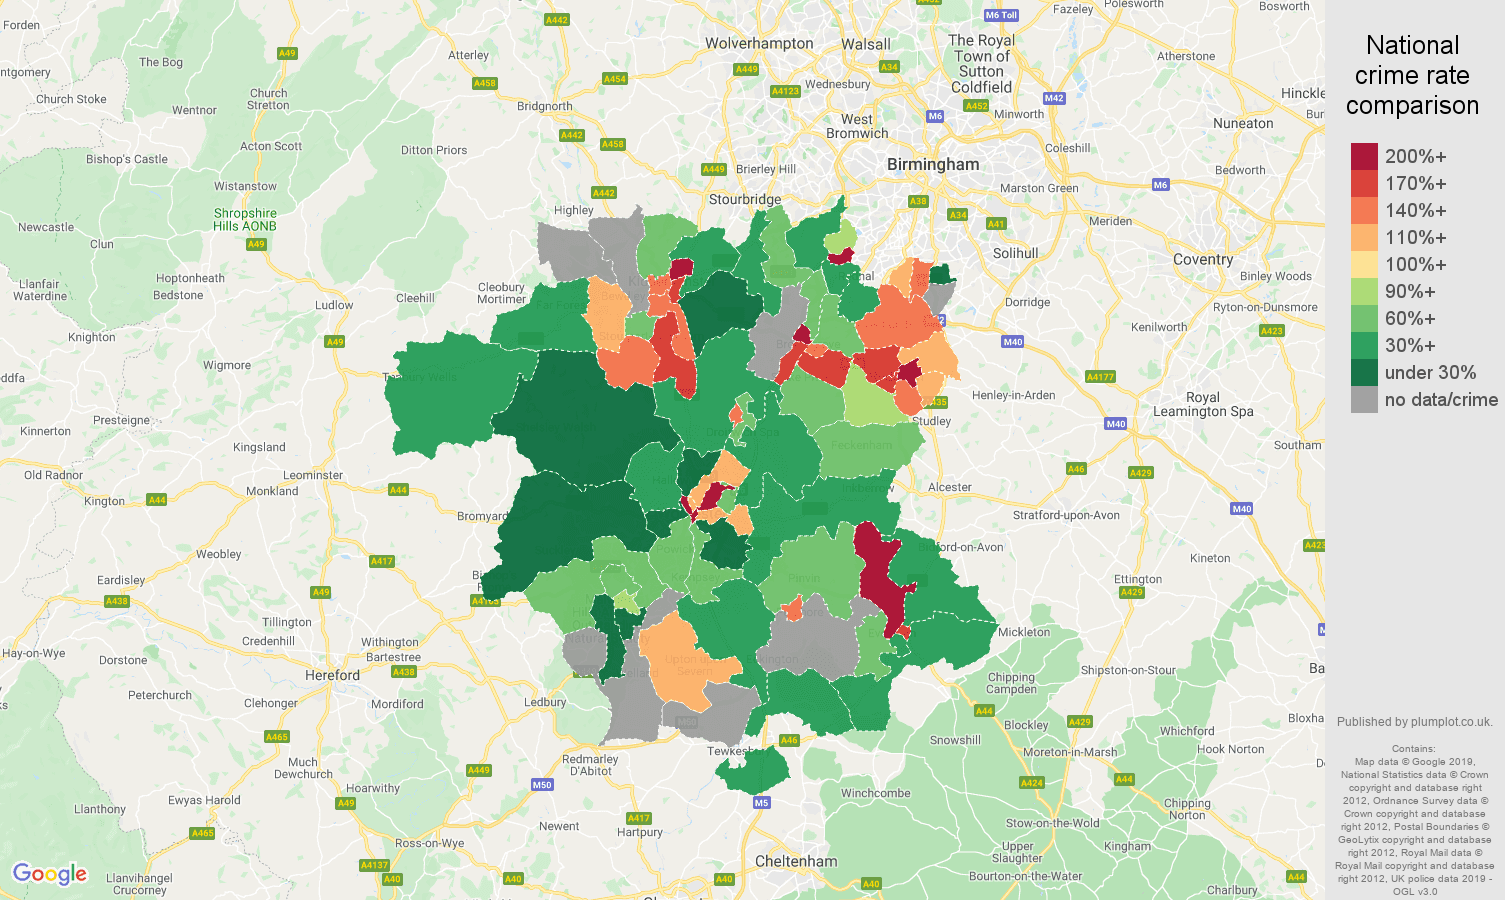 Worcestershire possession of weapons crime rate comparison map